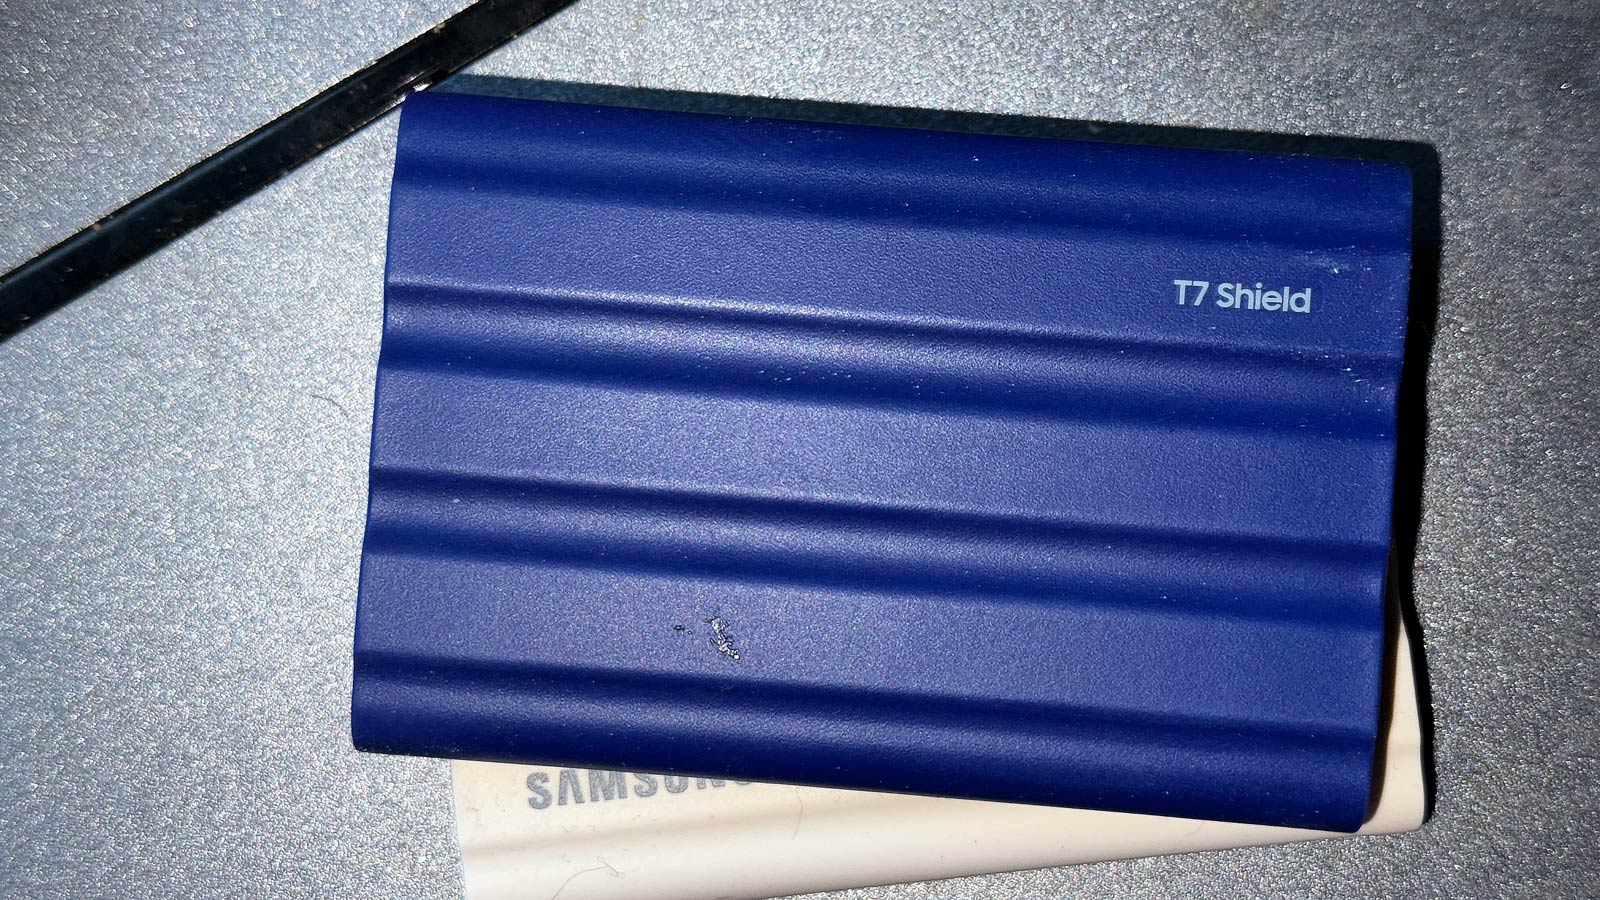 Samsung T7 Shield portable SSD sitting on top of a scanner